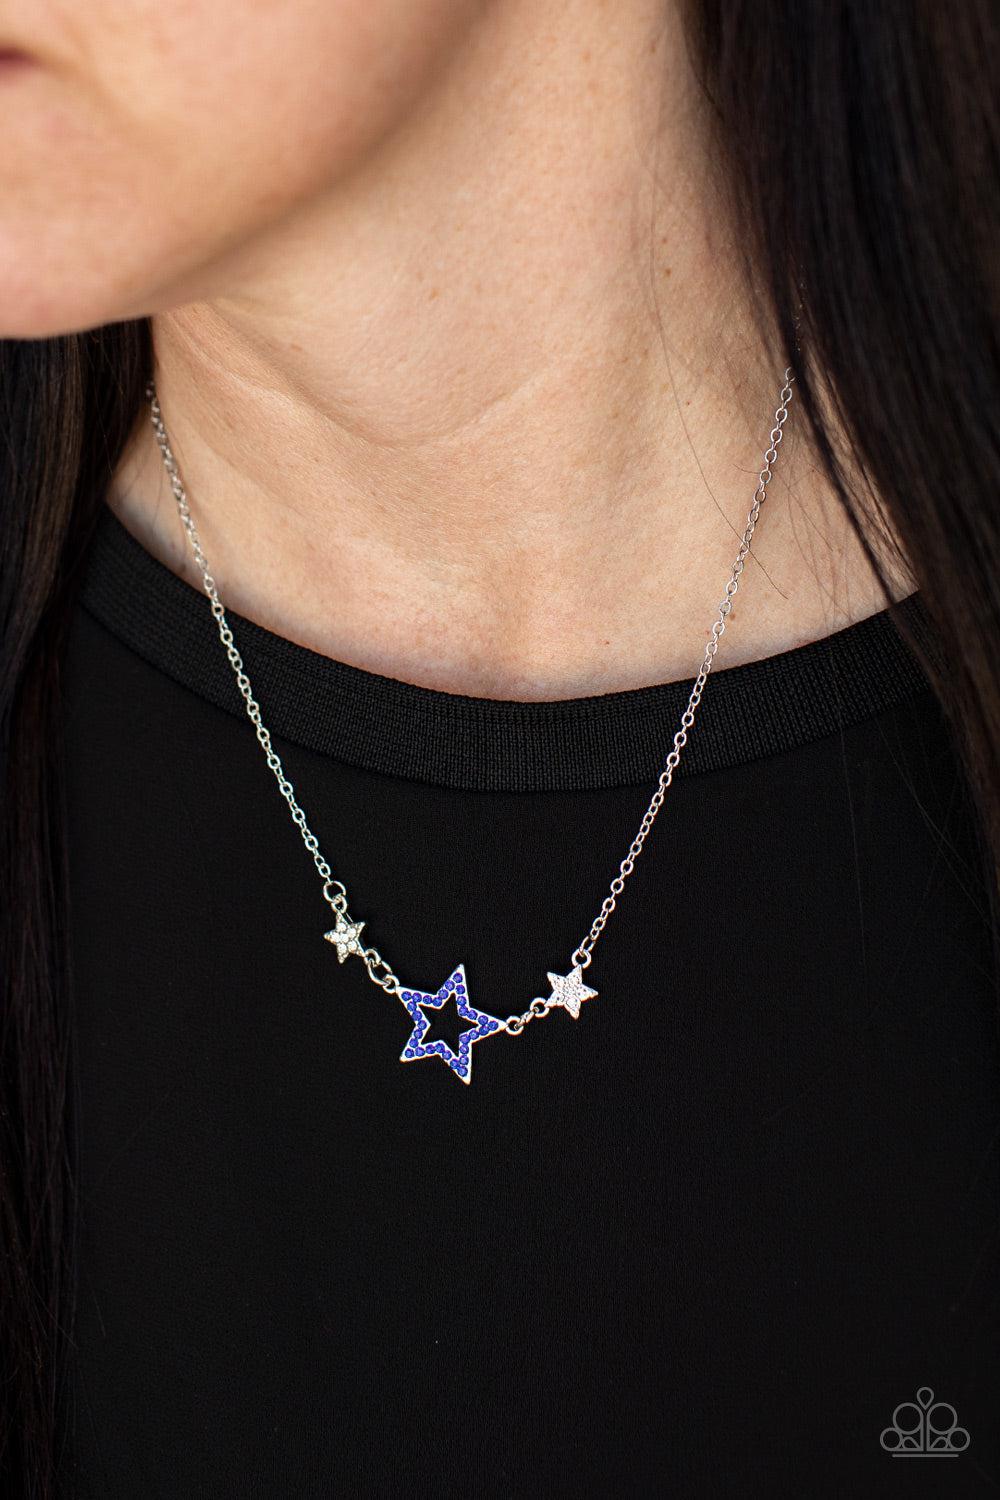 United We Sparkle Blue Rhinestone Star Necklace - Paparazzi Accessories-on model - CarasShop.com - $5 Jewelry by Cara Jewels